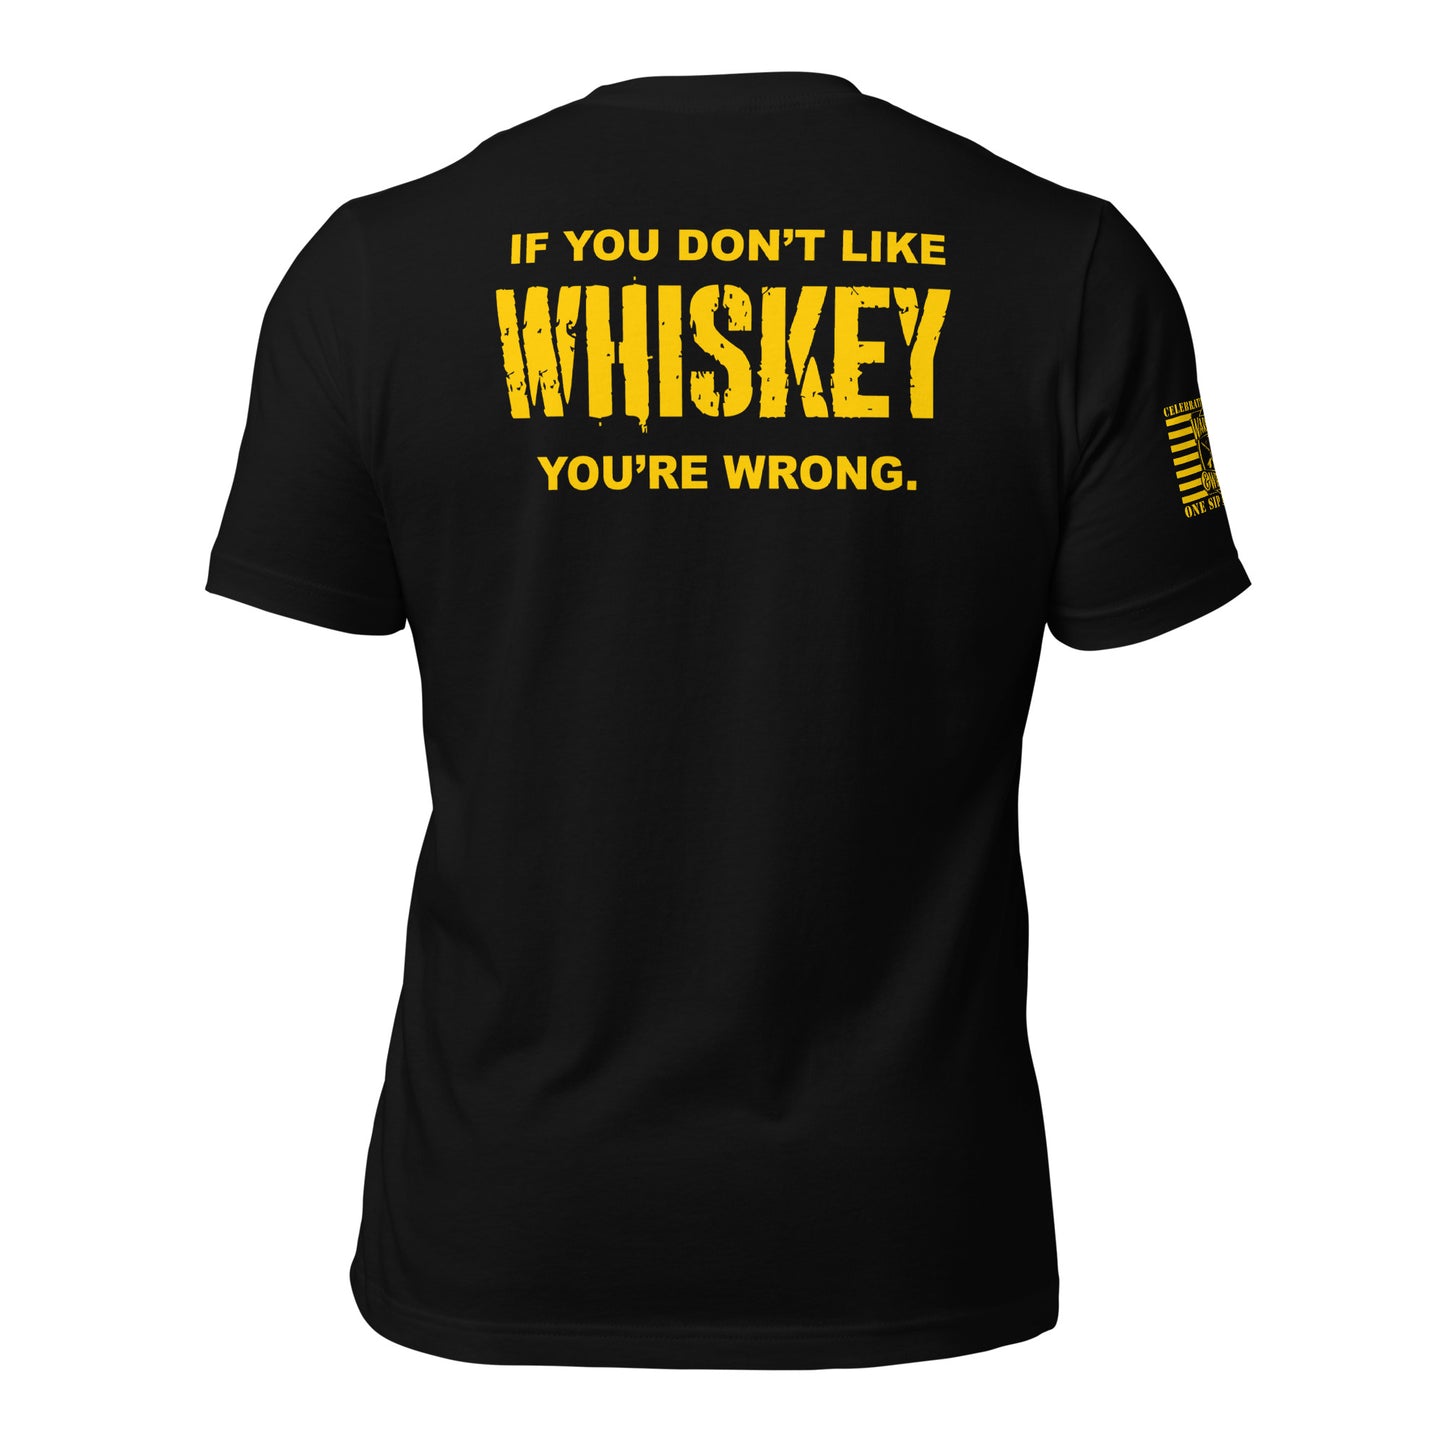 If You Don't Like Whiskey T-shirt